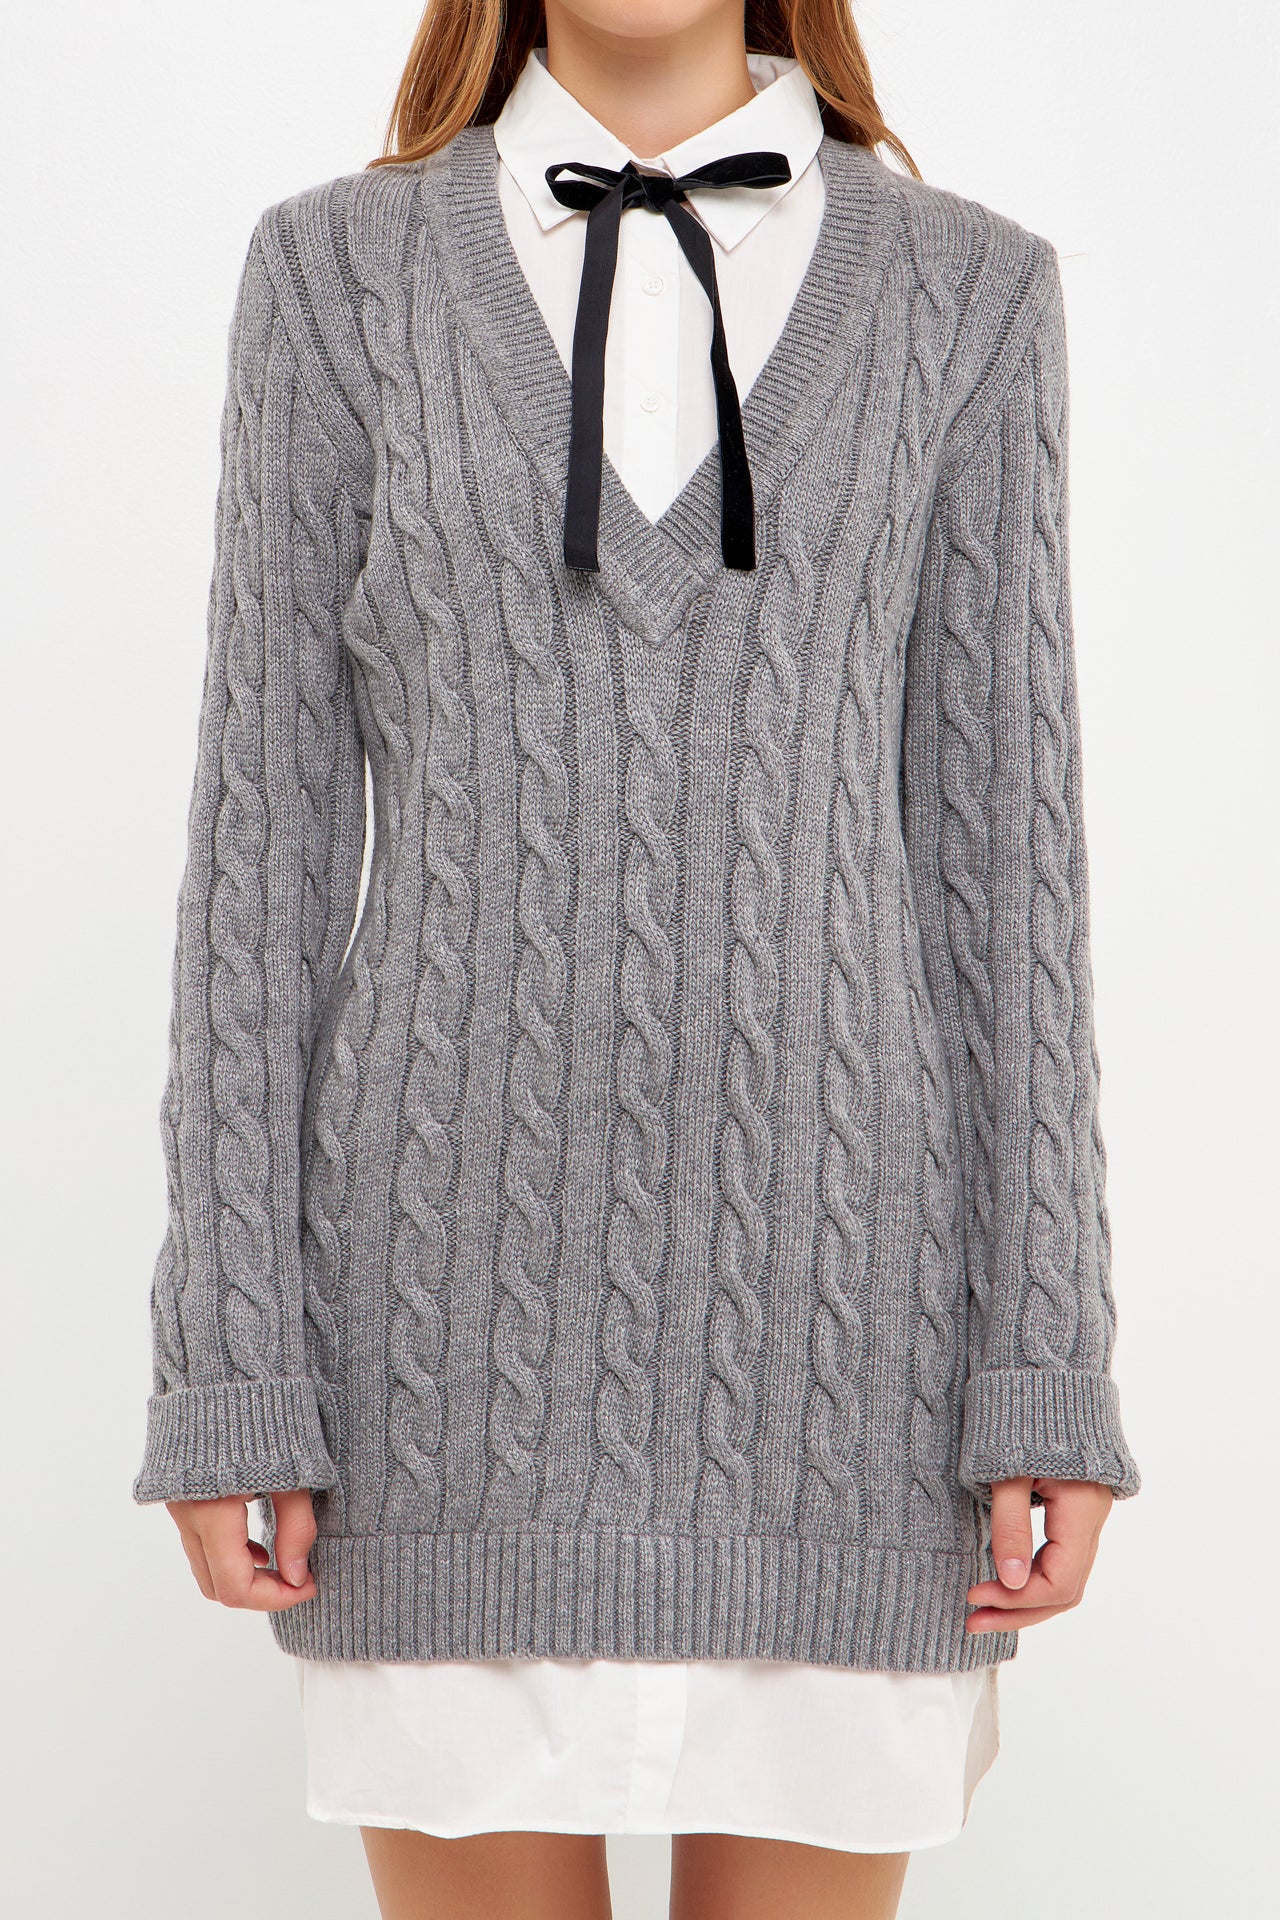 English Factory - Mixed Media Cable Knit Sweater Dress Grey / XS